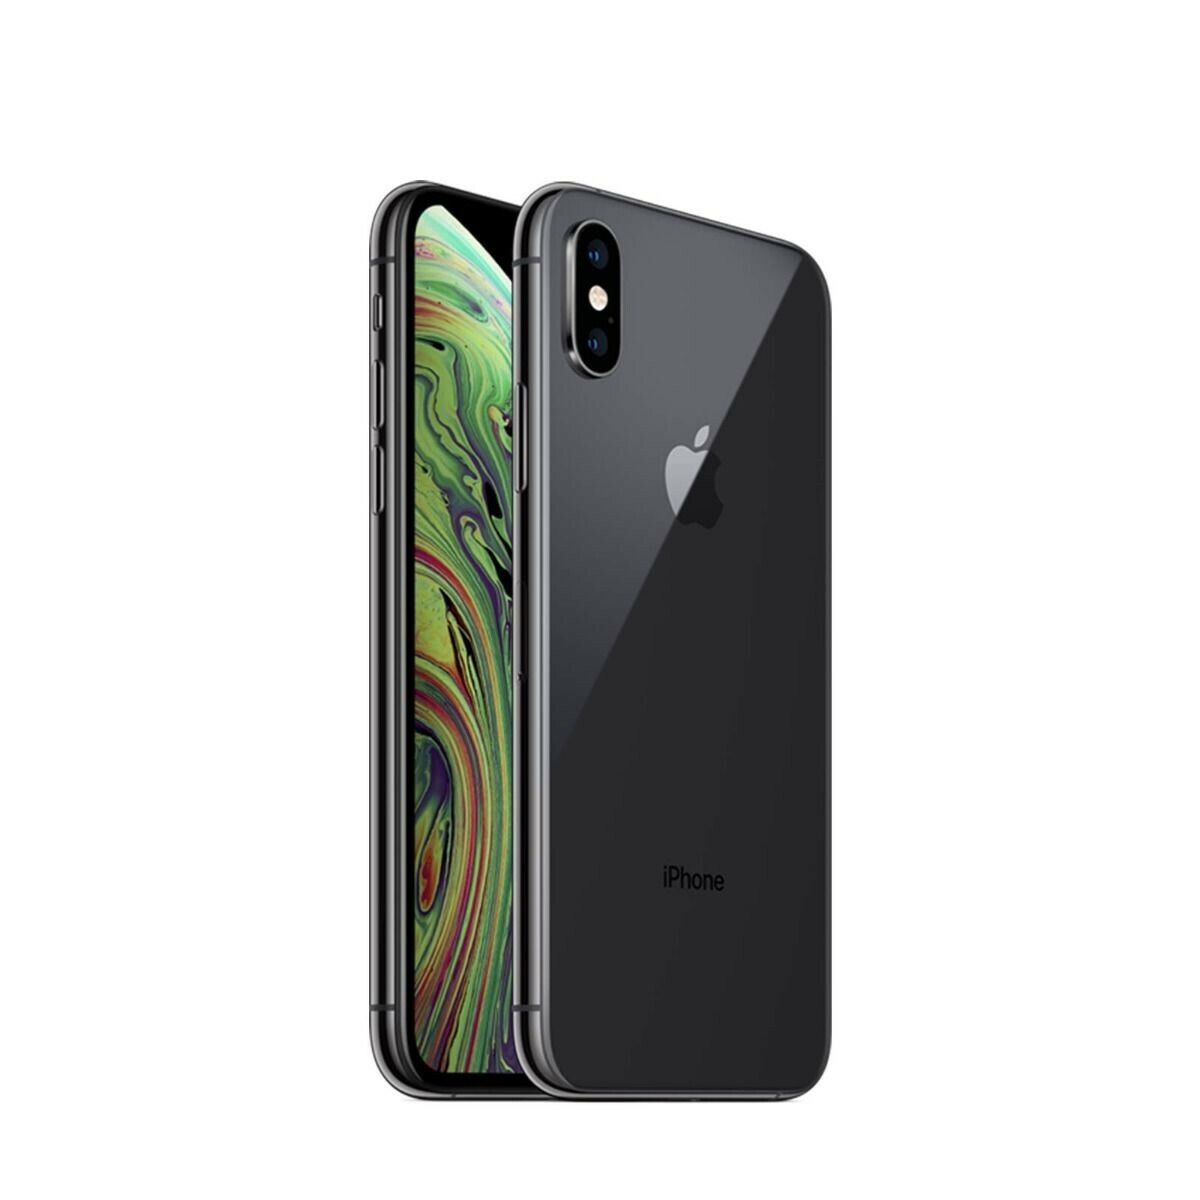 Apple iPhone XS 64GB 256GB 512GB Gold, Space Gray, Silver 